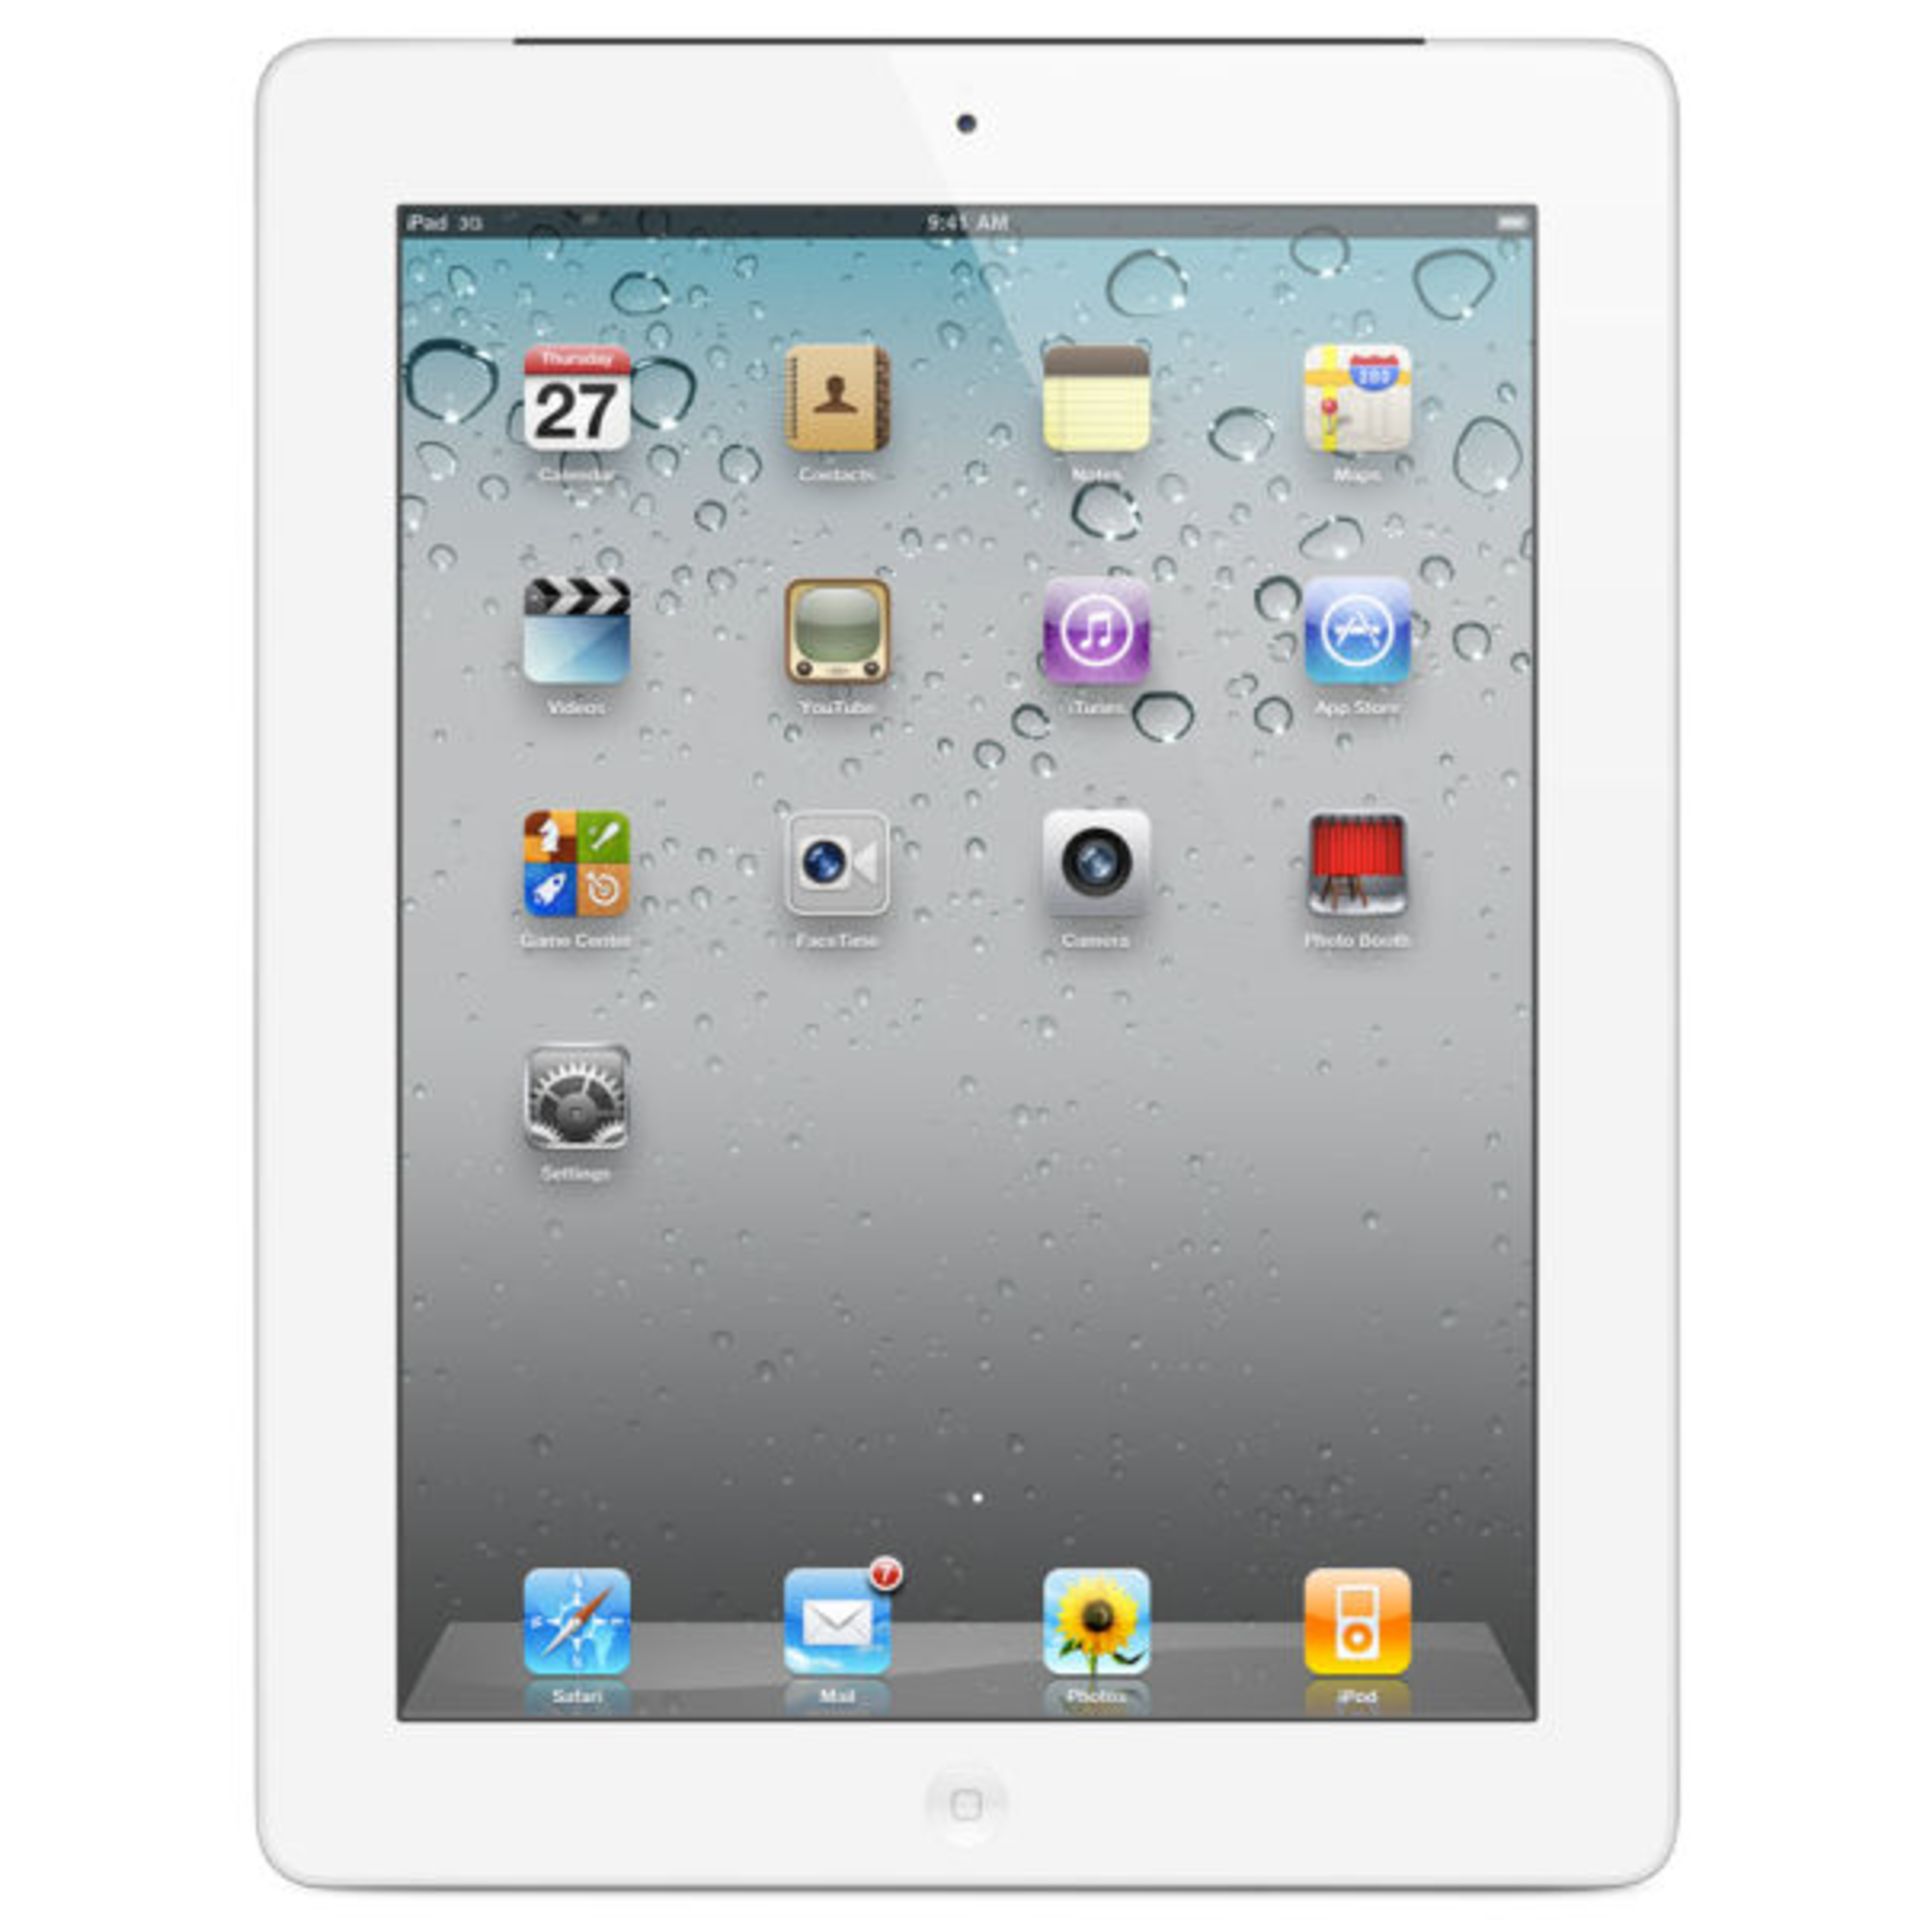 V Grade A Apple iPad 2 16GB WHITE WiFi Front And Rear Facing Cameras Boxed With Accessories